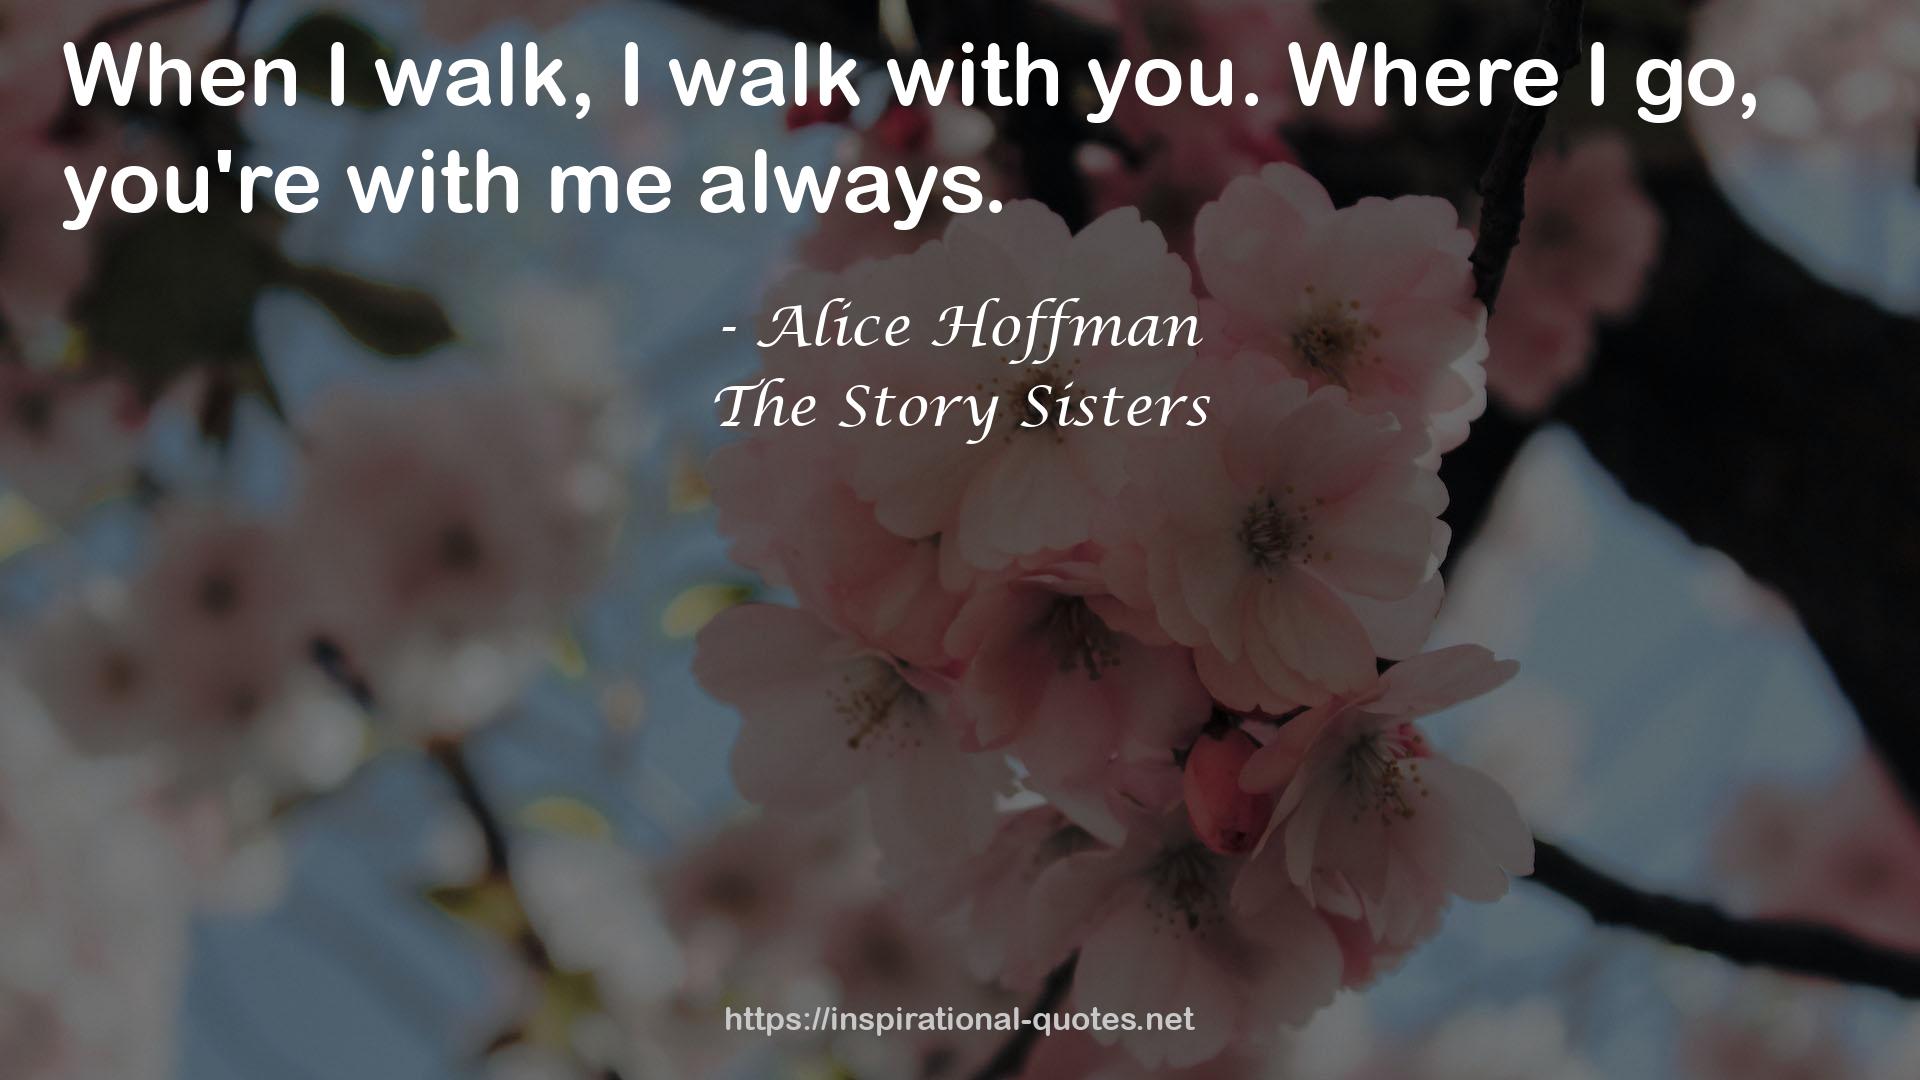 The Story Sisters QUOTES